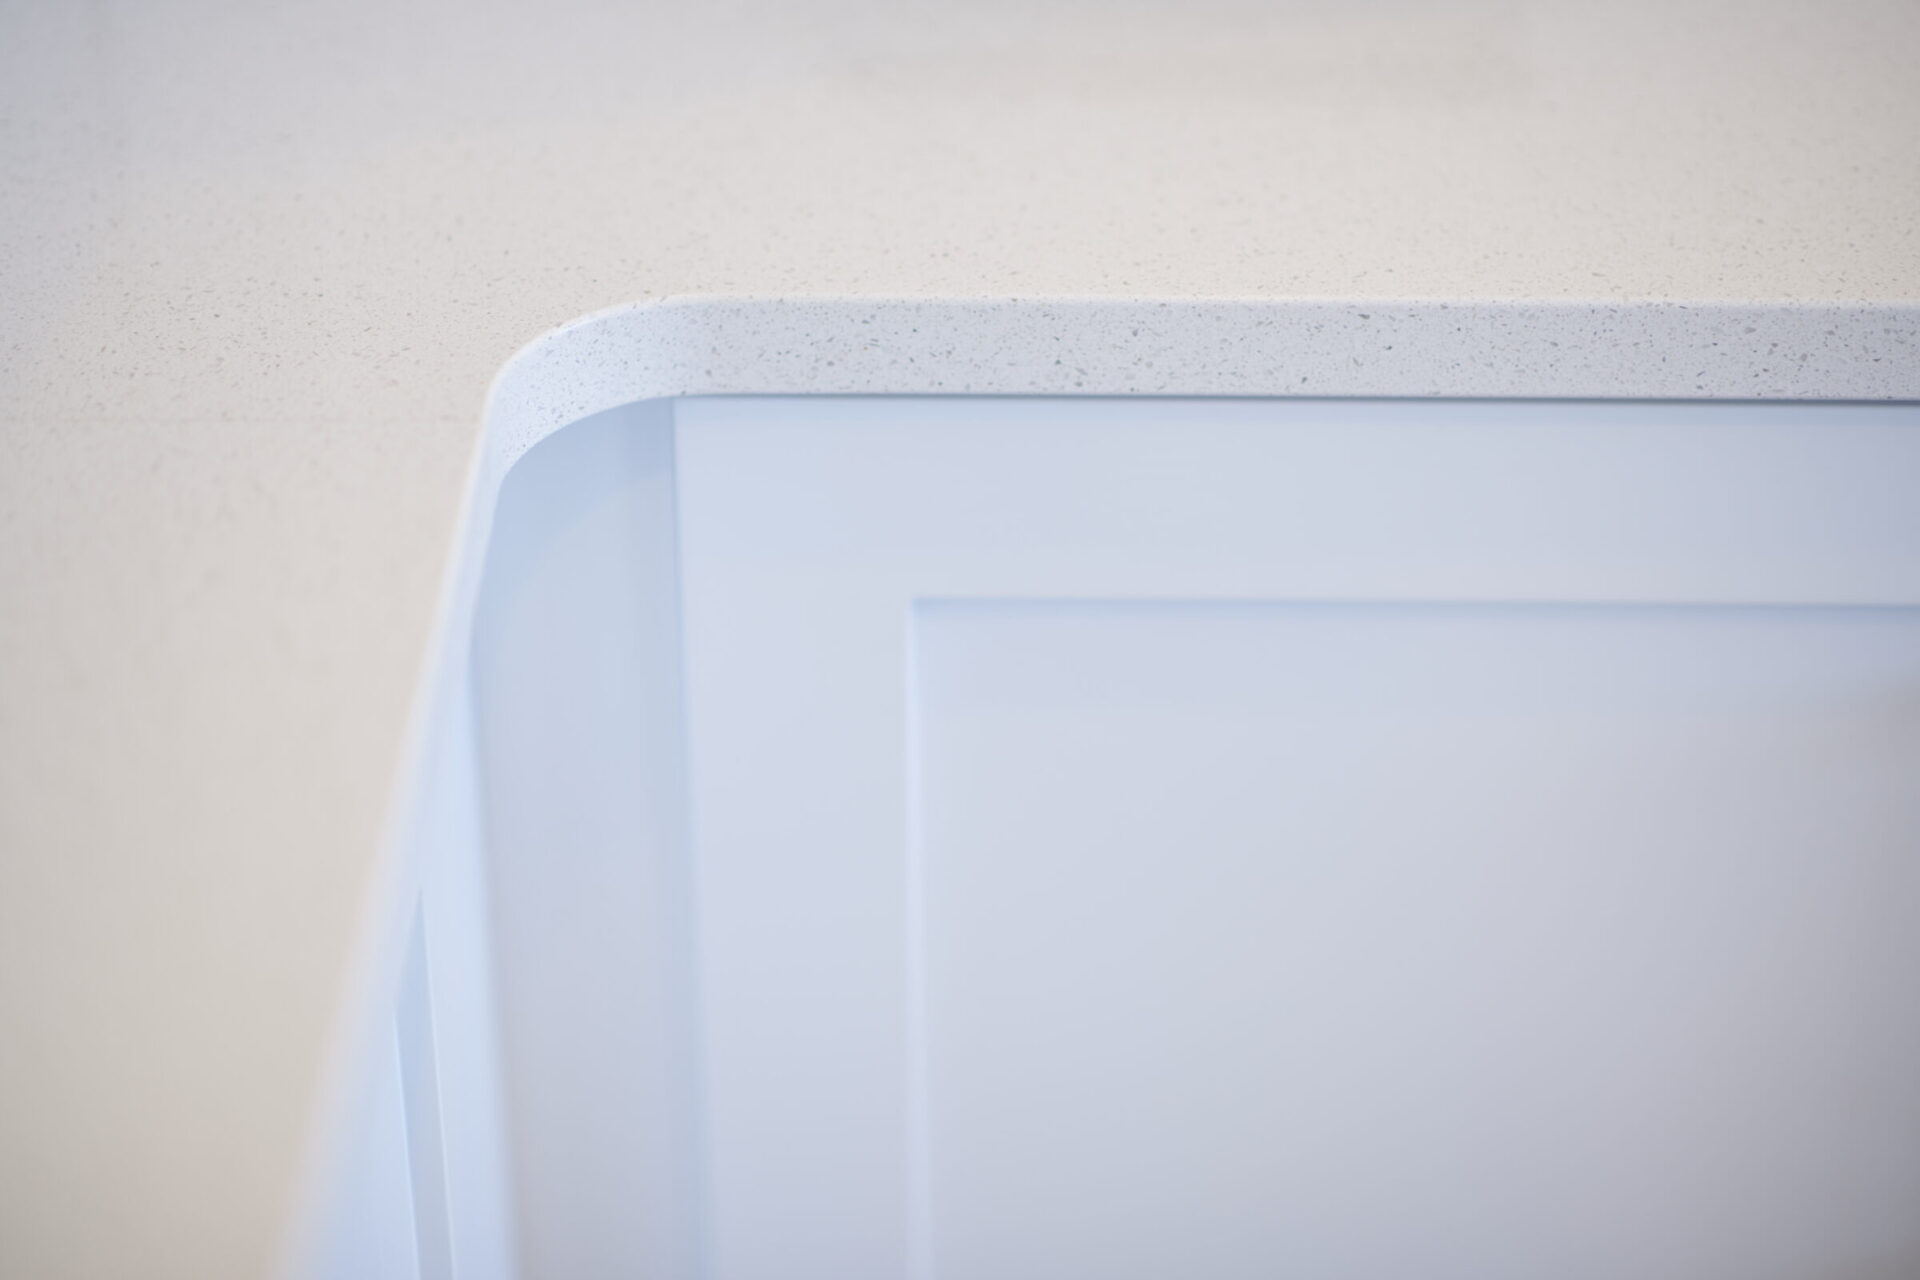 The image shows a close-up of a white kitchen cabinet with a minimalist design and a speckled white countertop, softly focused with a light background.